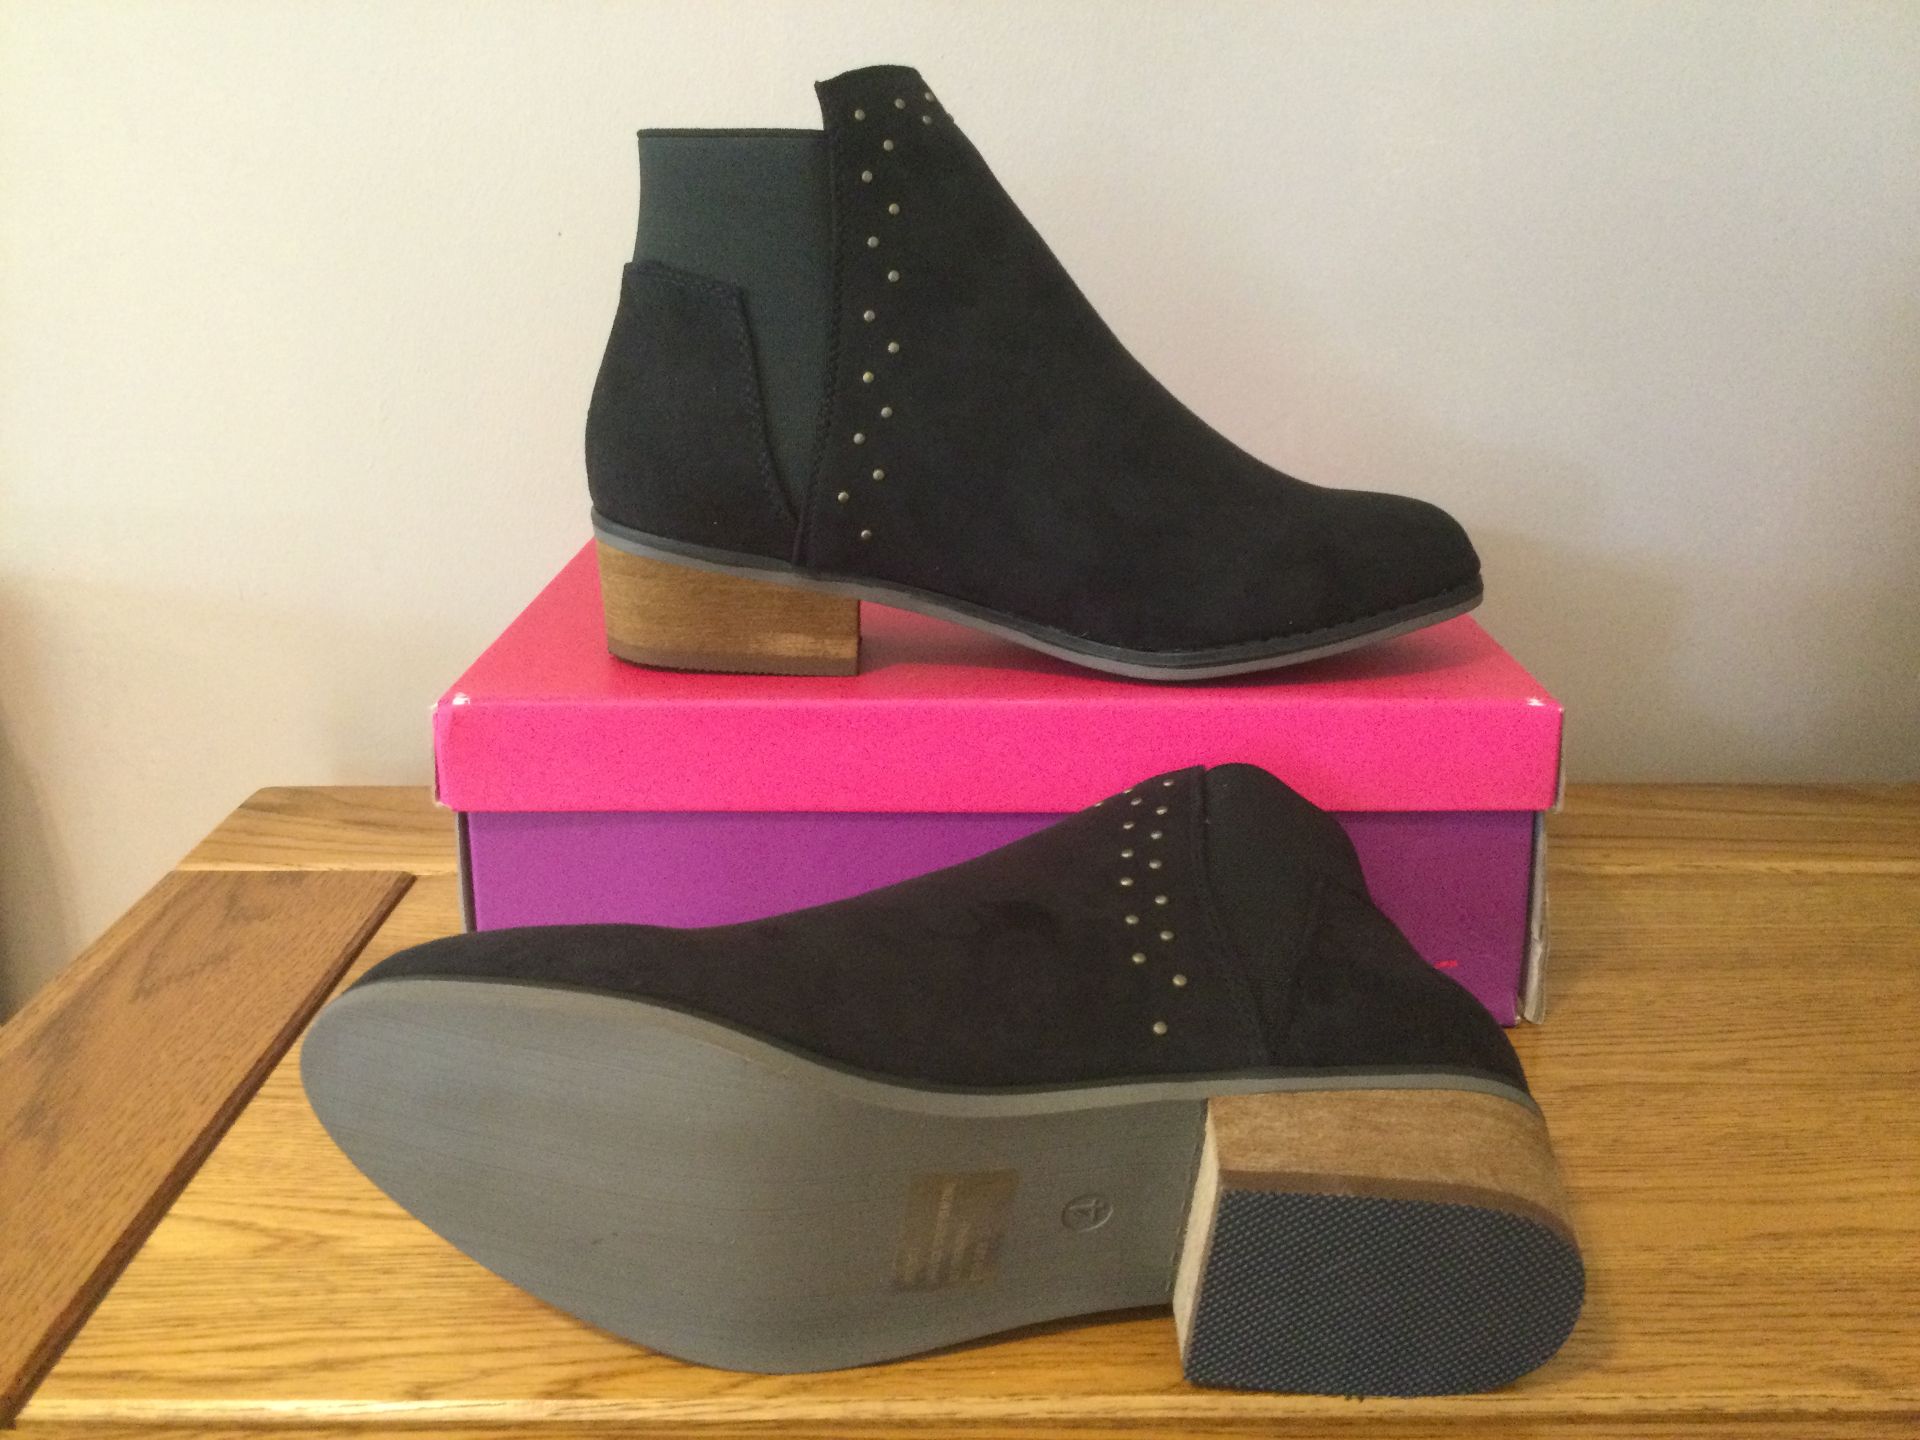 Dolcis “Wendy” Ankle Boots, Size 4, Black - New RRP £45.00 - Image 3 of 6